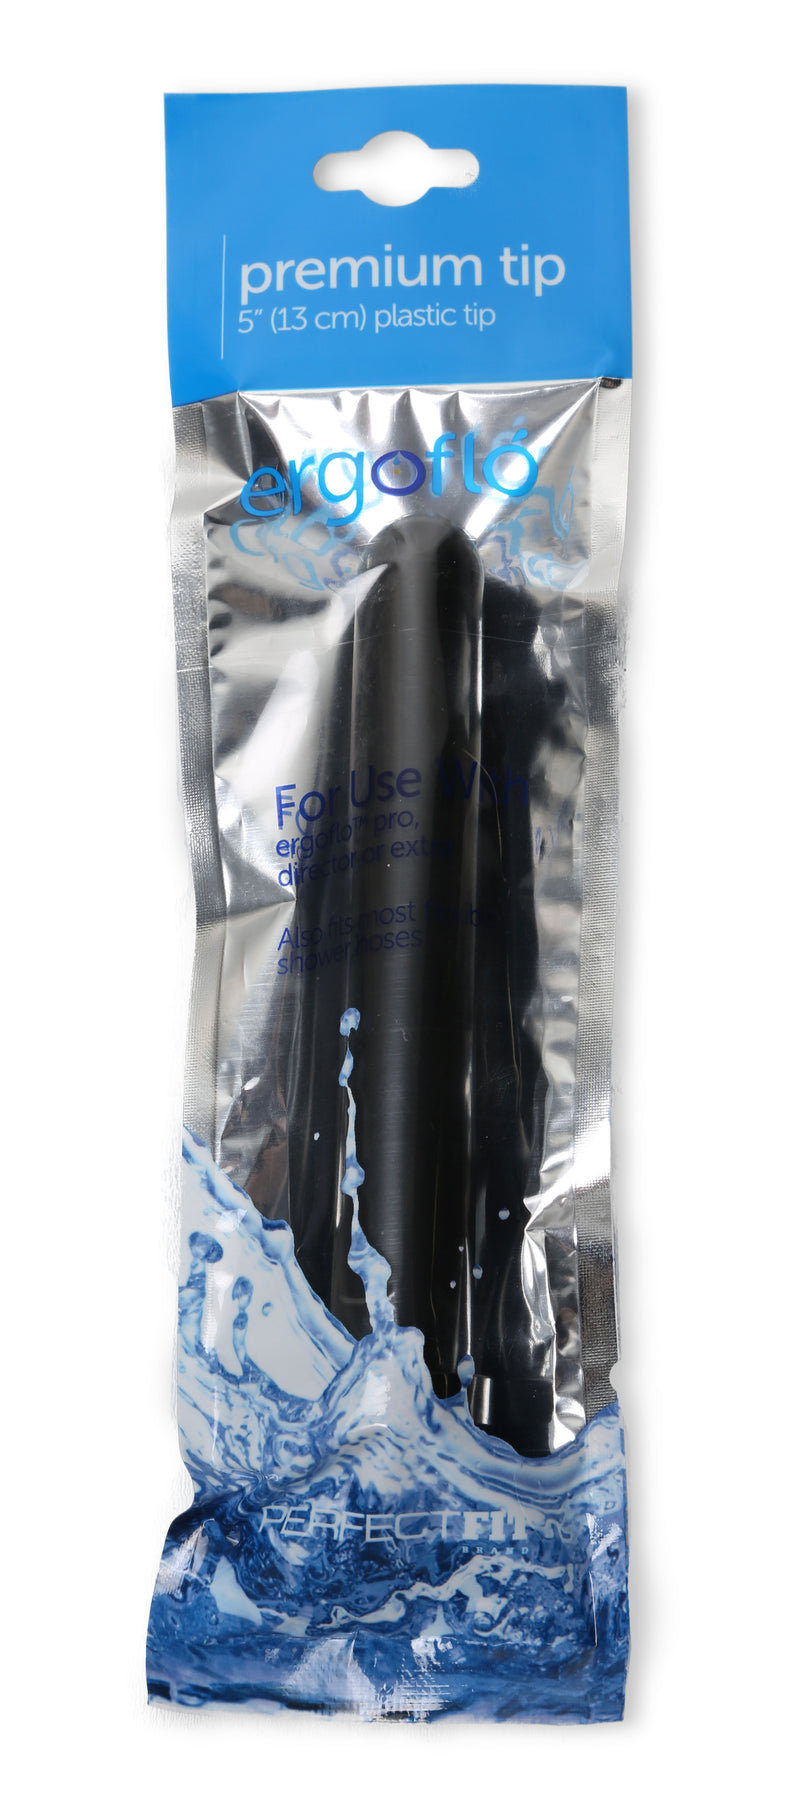 Perfect Fit Perfect Fit Brand Ergoflo 5 inches Plastic Nozzle at $7.99